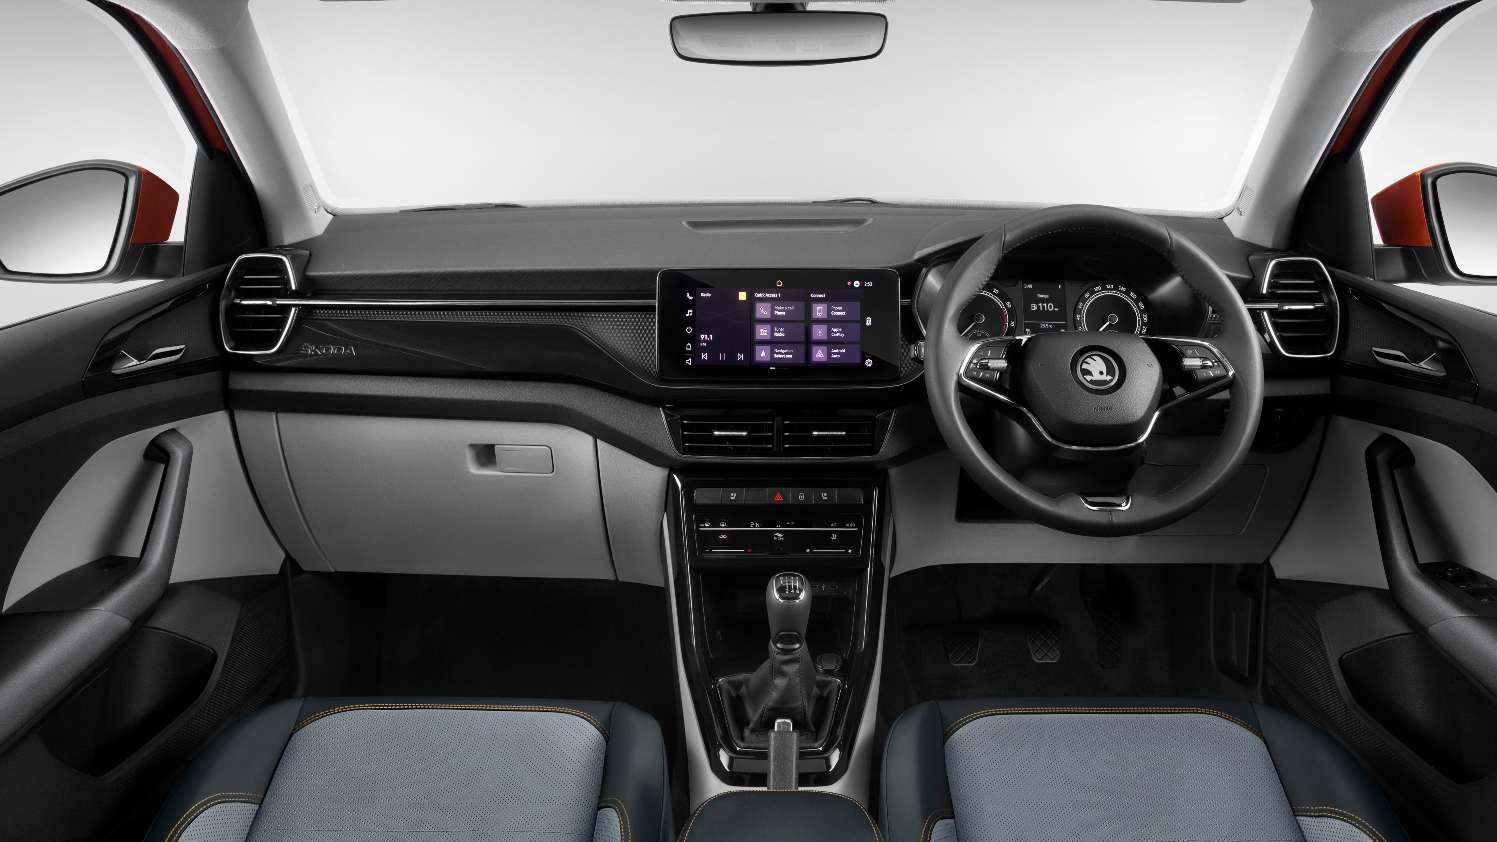 Skoda has smartly used different textures for the multi-layer dashboard of the Kushaq. Image: Skoda